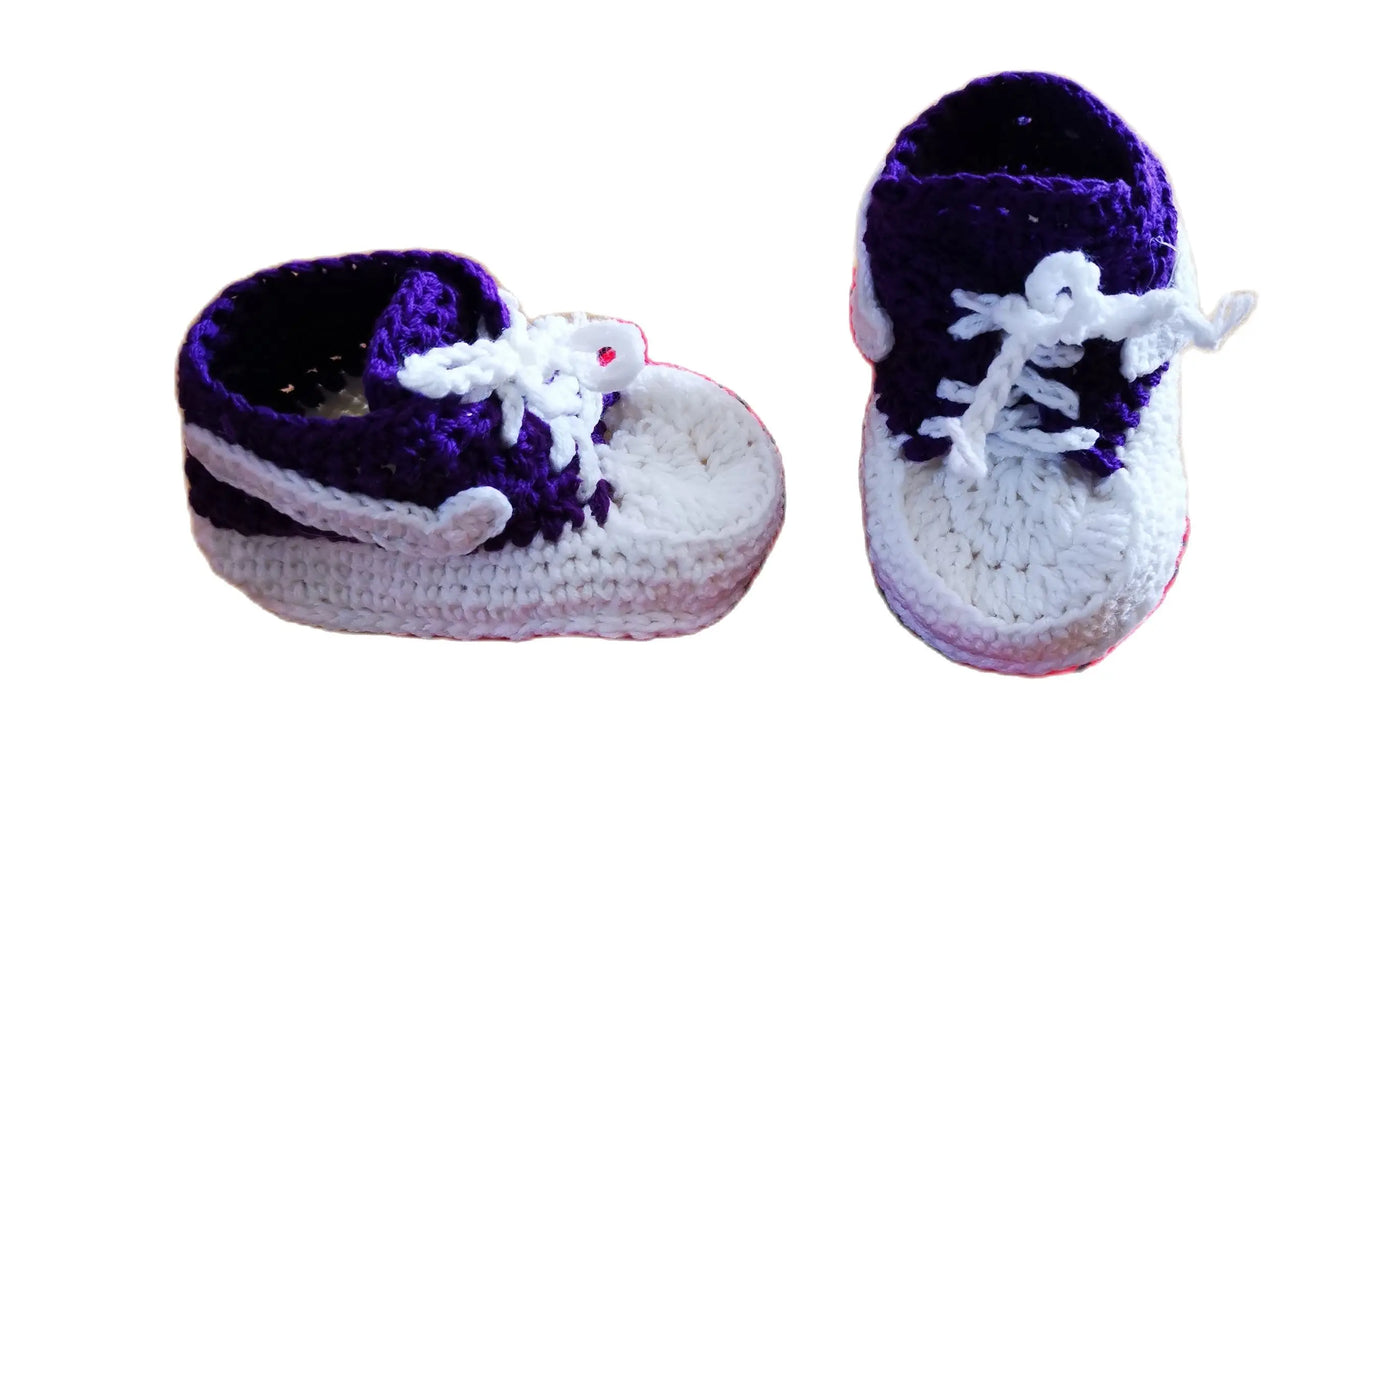 Made Knitting Wool Crochet Baby Shoes